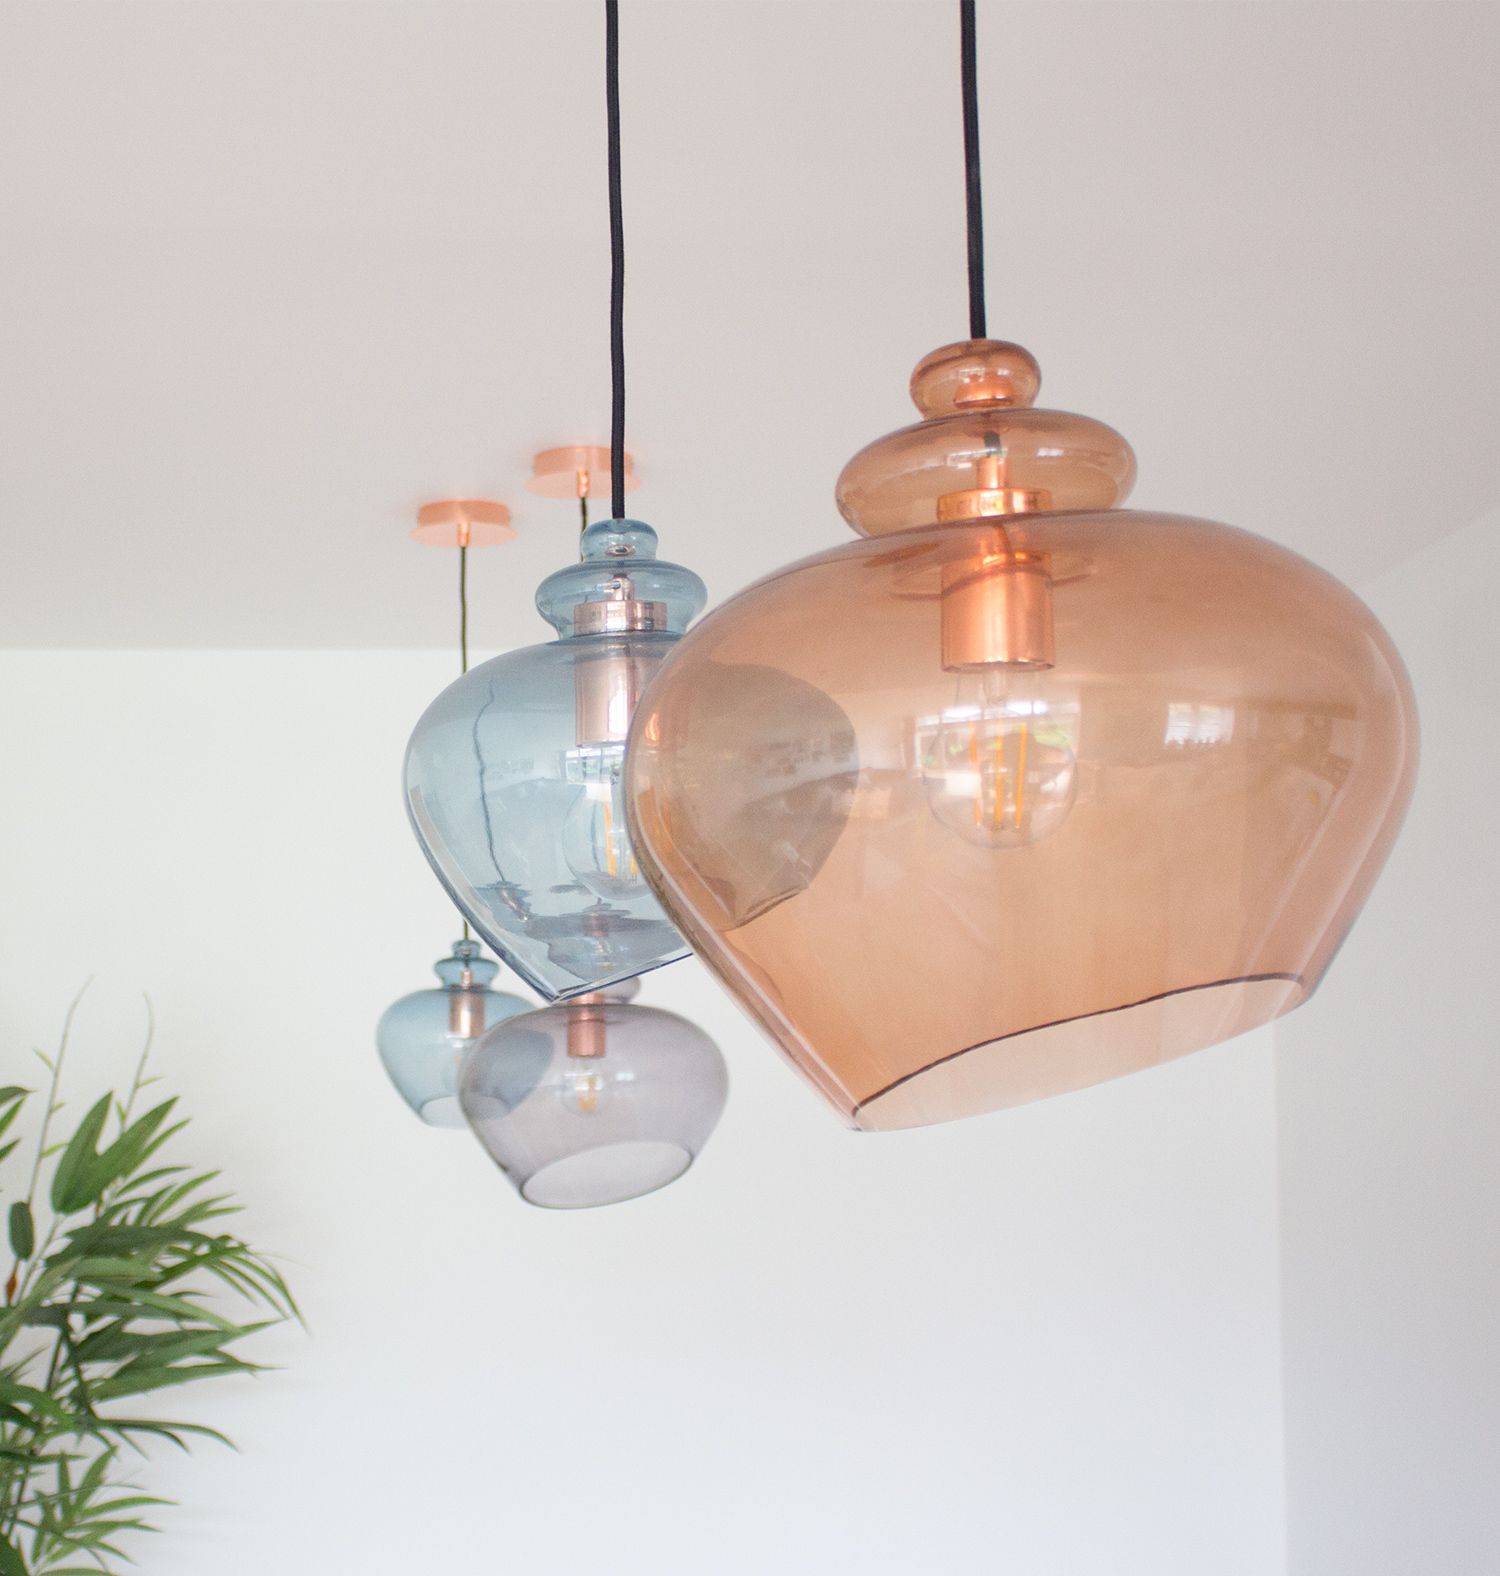 A close up of the four glass blown pendant lights in orange and blue.